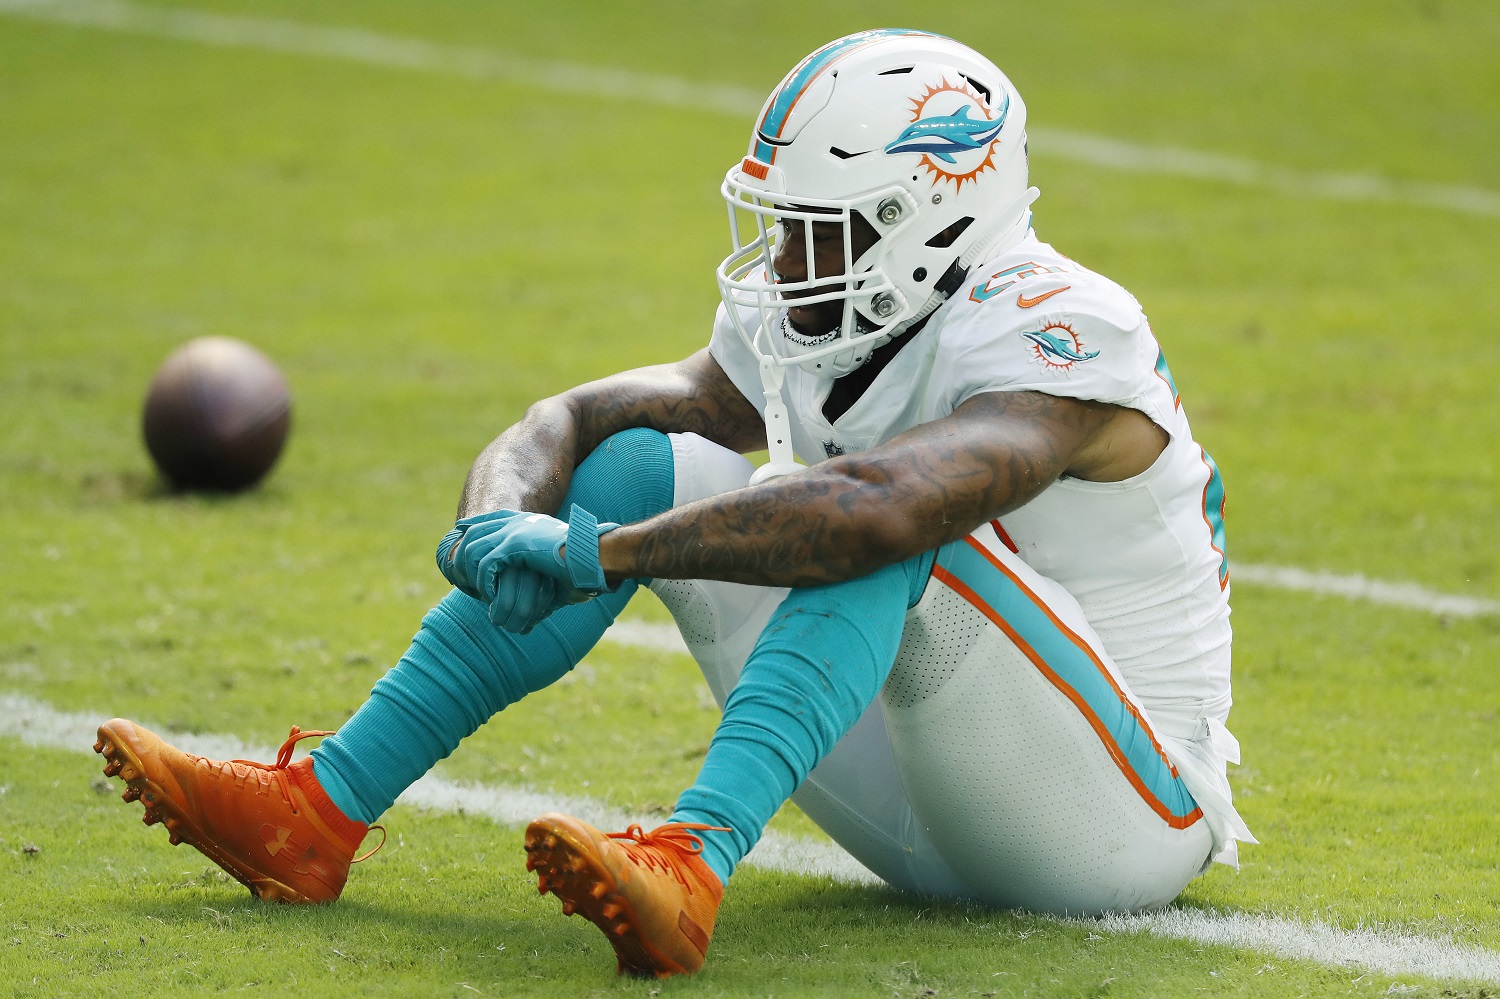 Miami Dolphins cornerback Xavien Howard reacts after dropping an interception against the Buffalo Bills on Sept. 20, 2020. Howard went on to lead the NFL with 10 interceptions in an All-Pro season. | Michael Reaves/Getty Images